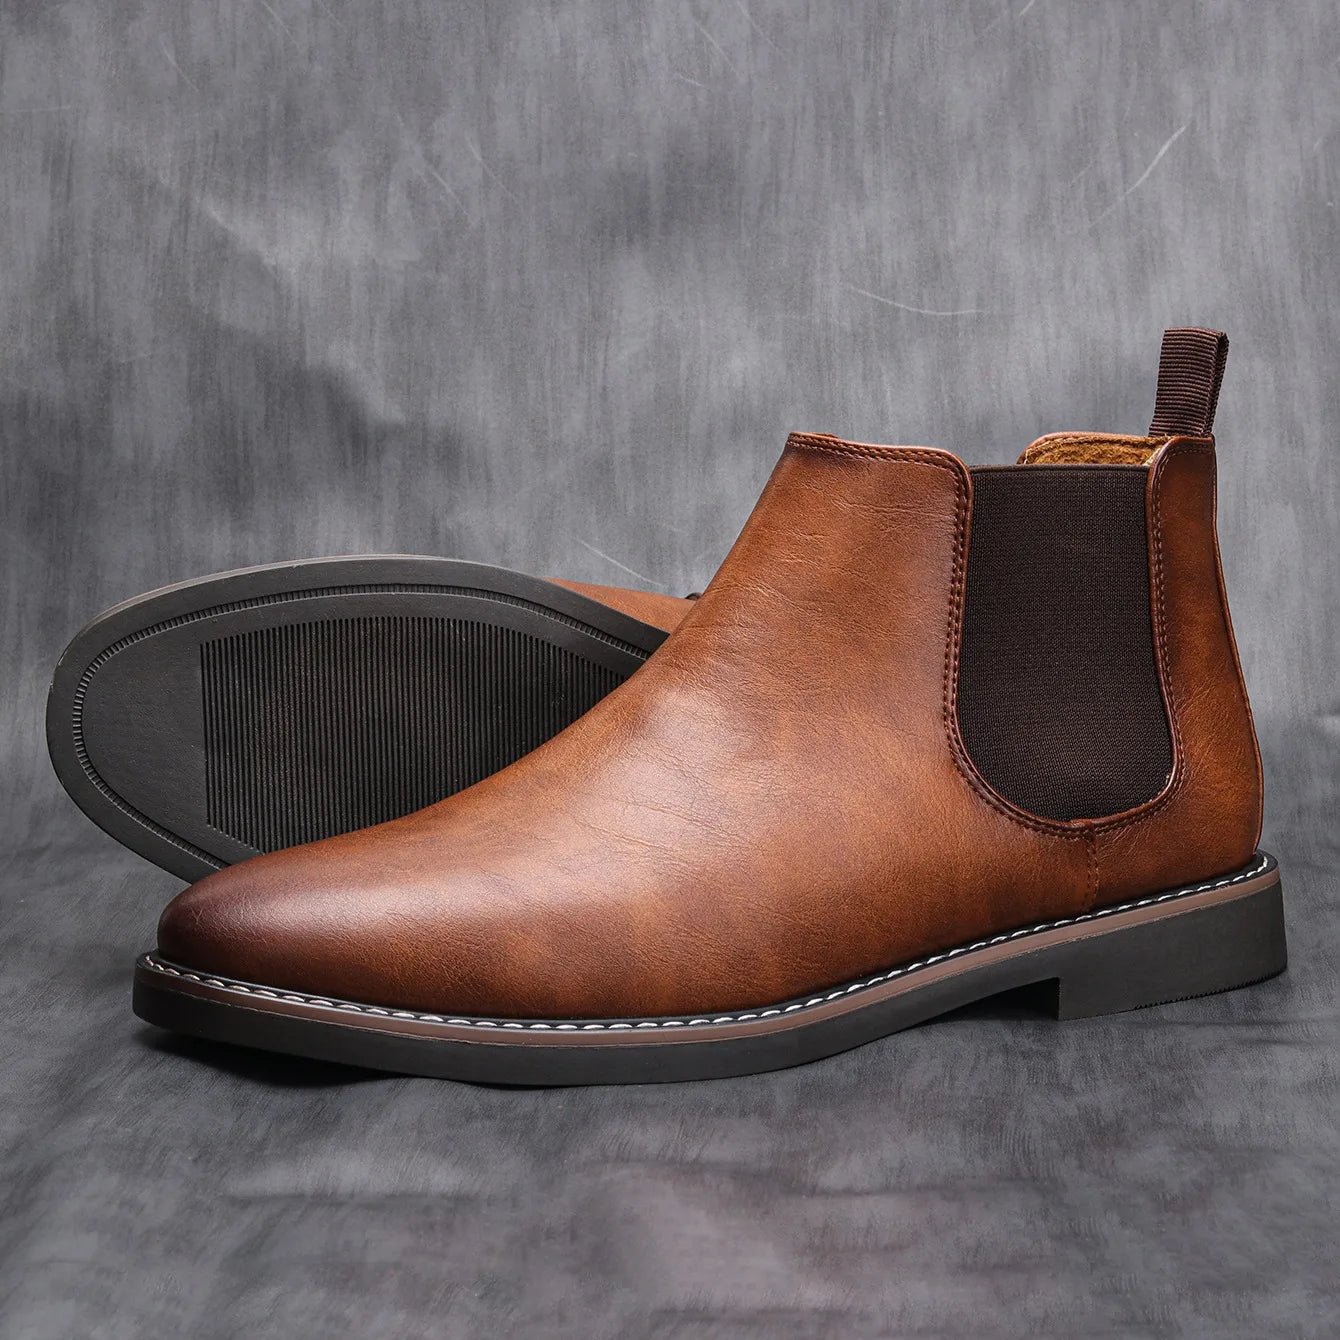 Heritage Step: Classic Men's Chelsea Boots for Modern Comfort